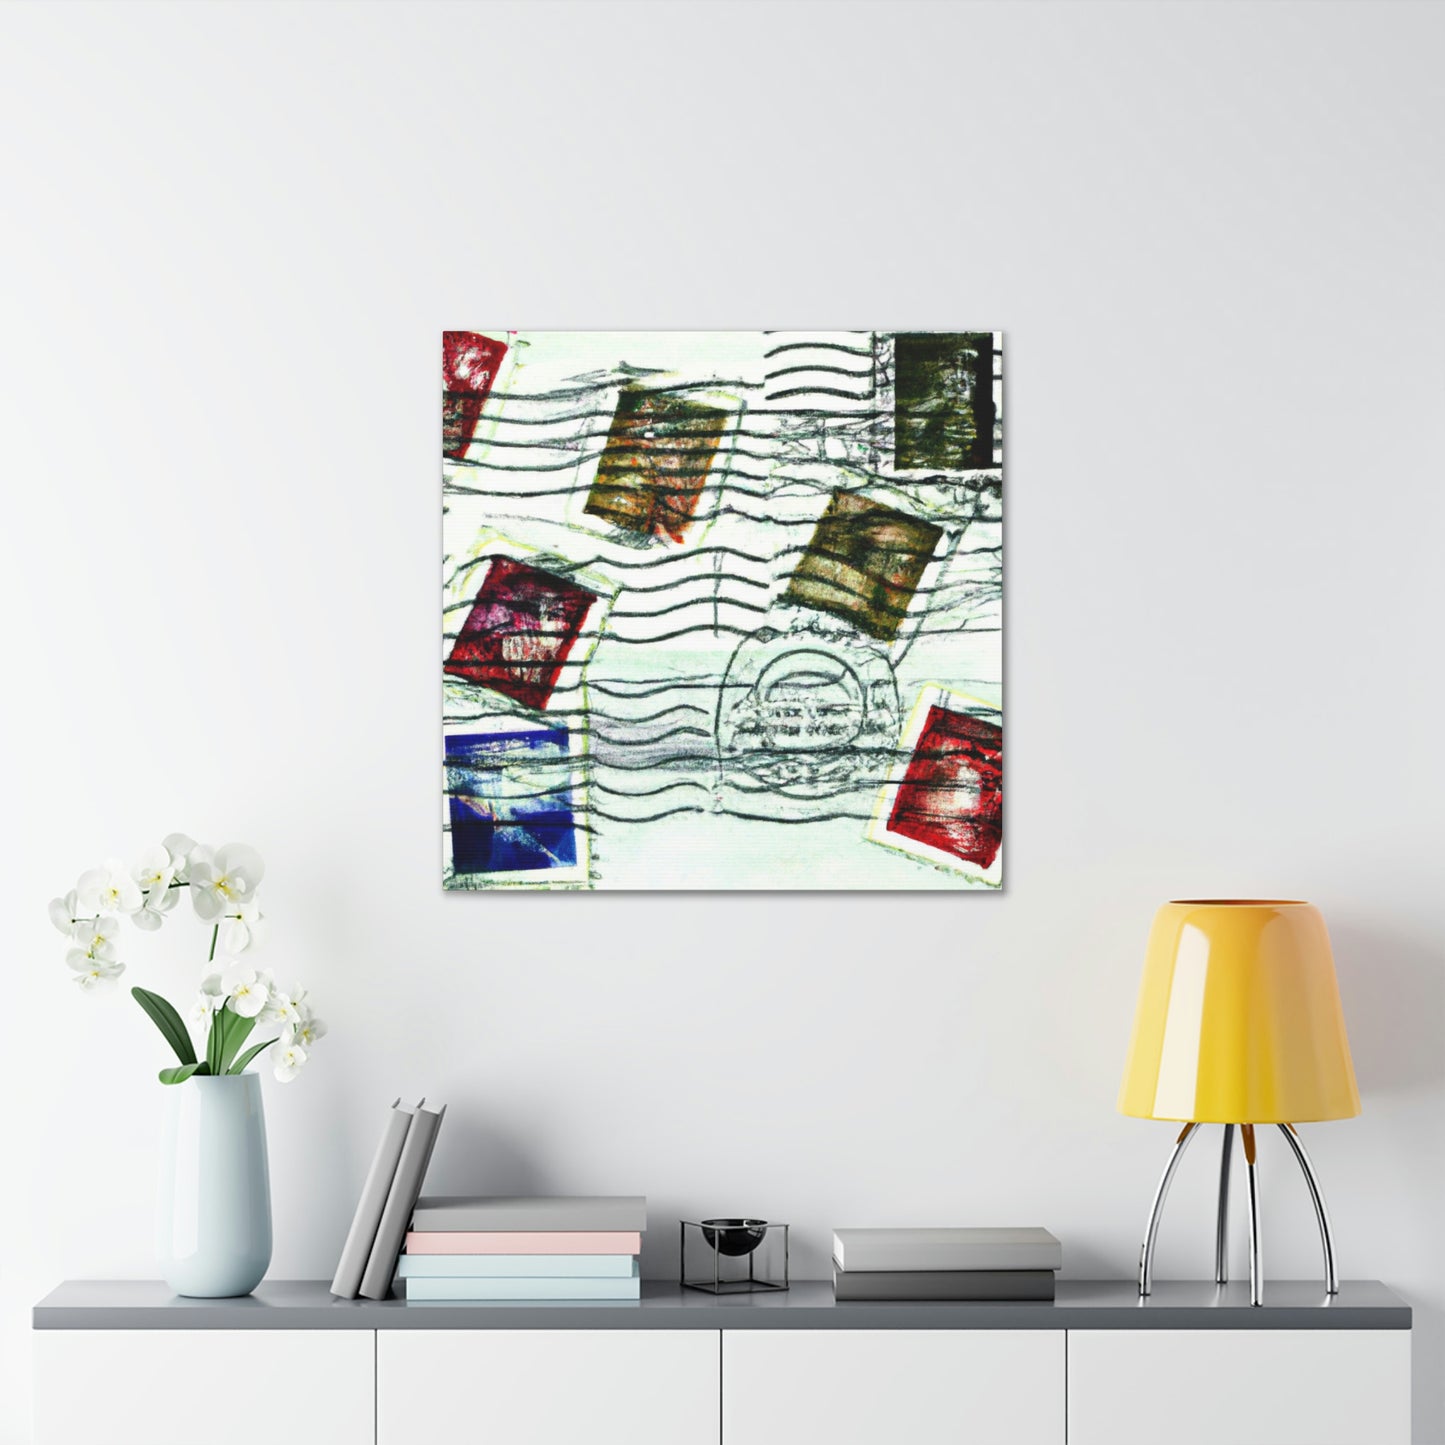 "Cultures of the World" - Postage Stamp Collector Canvas Wall Art